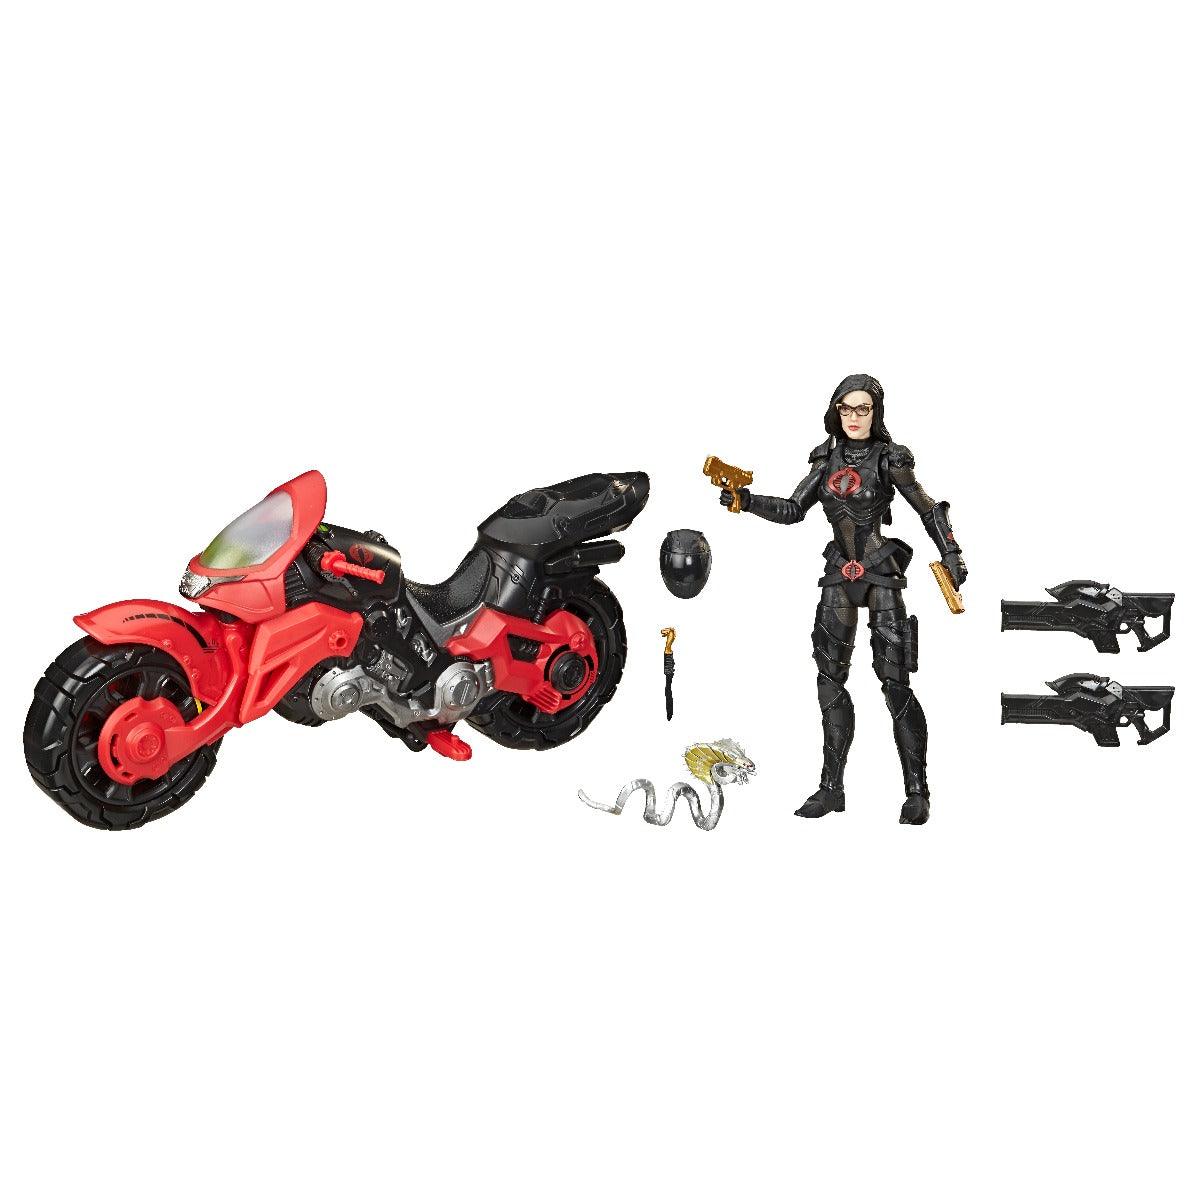 G.I. Joe Classified Series Special Missions: Cobra Island Baroness with C.O.I.L. Figure and Vehicle Set 13, Premium Toys, Custom Package Art